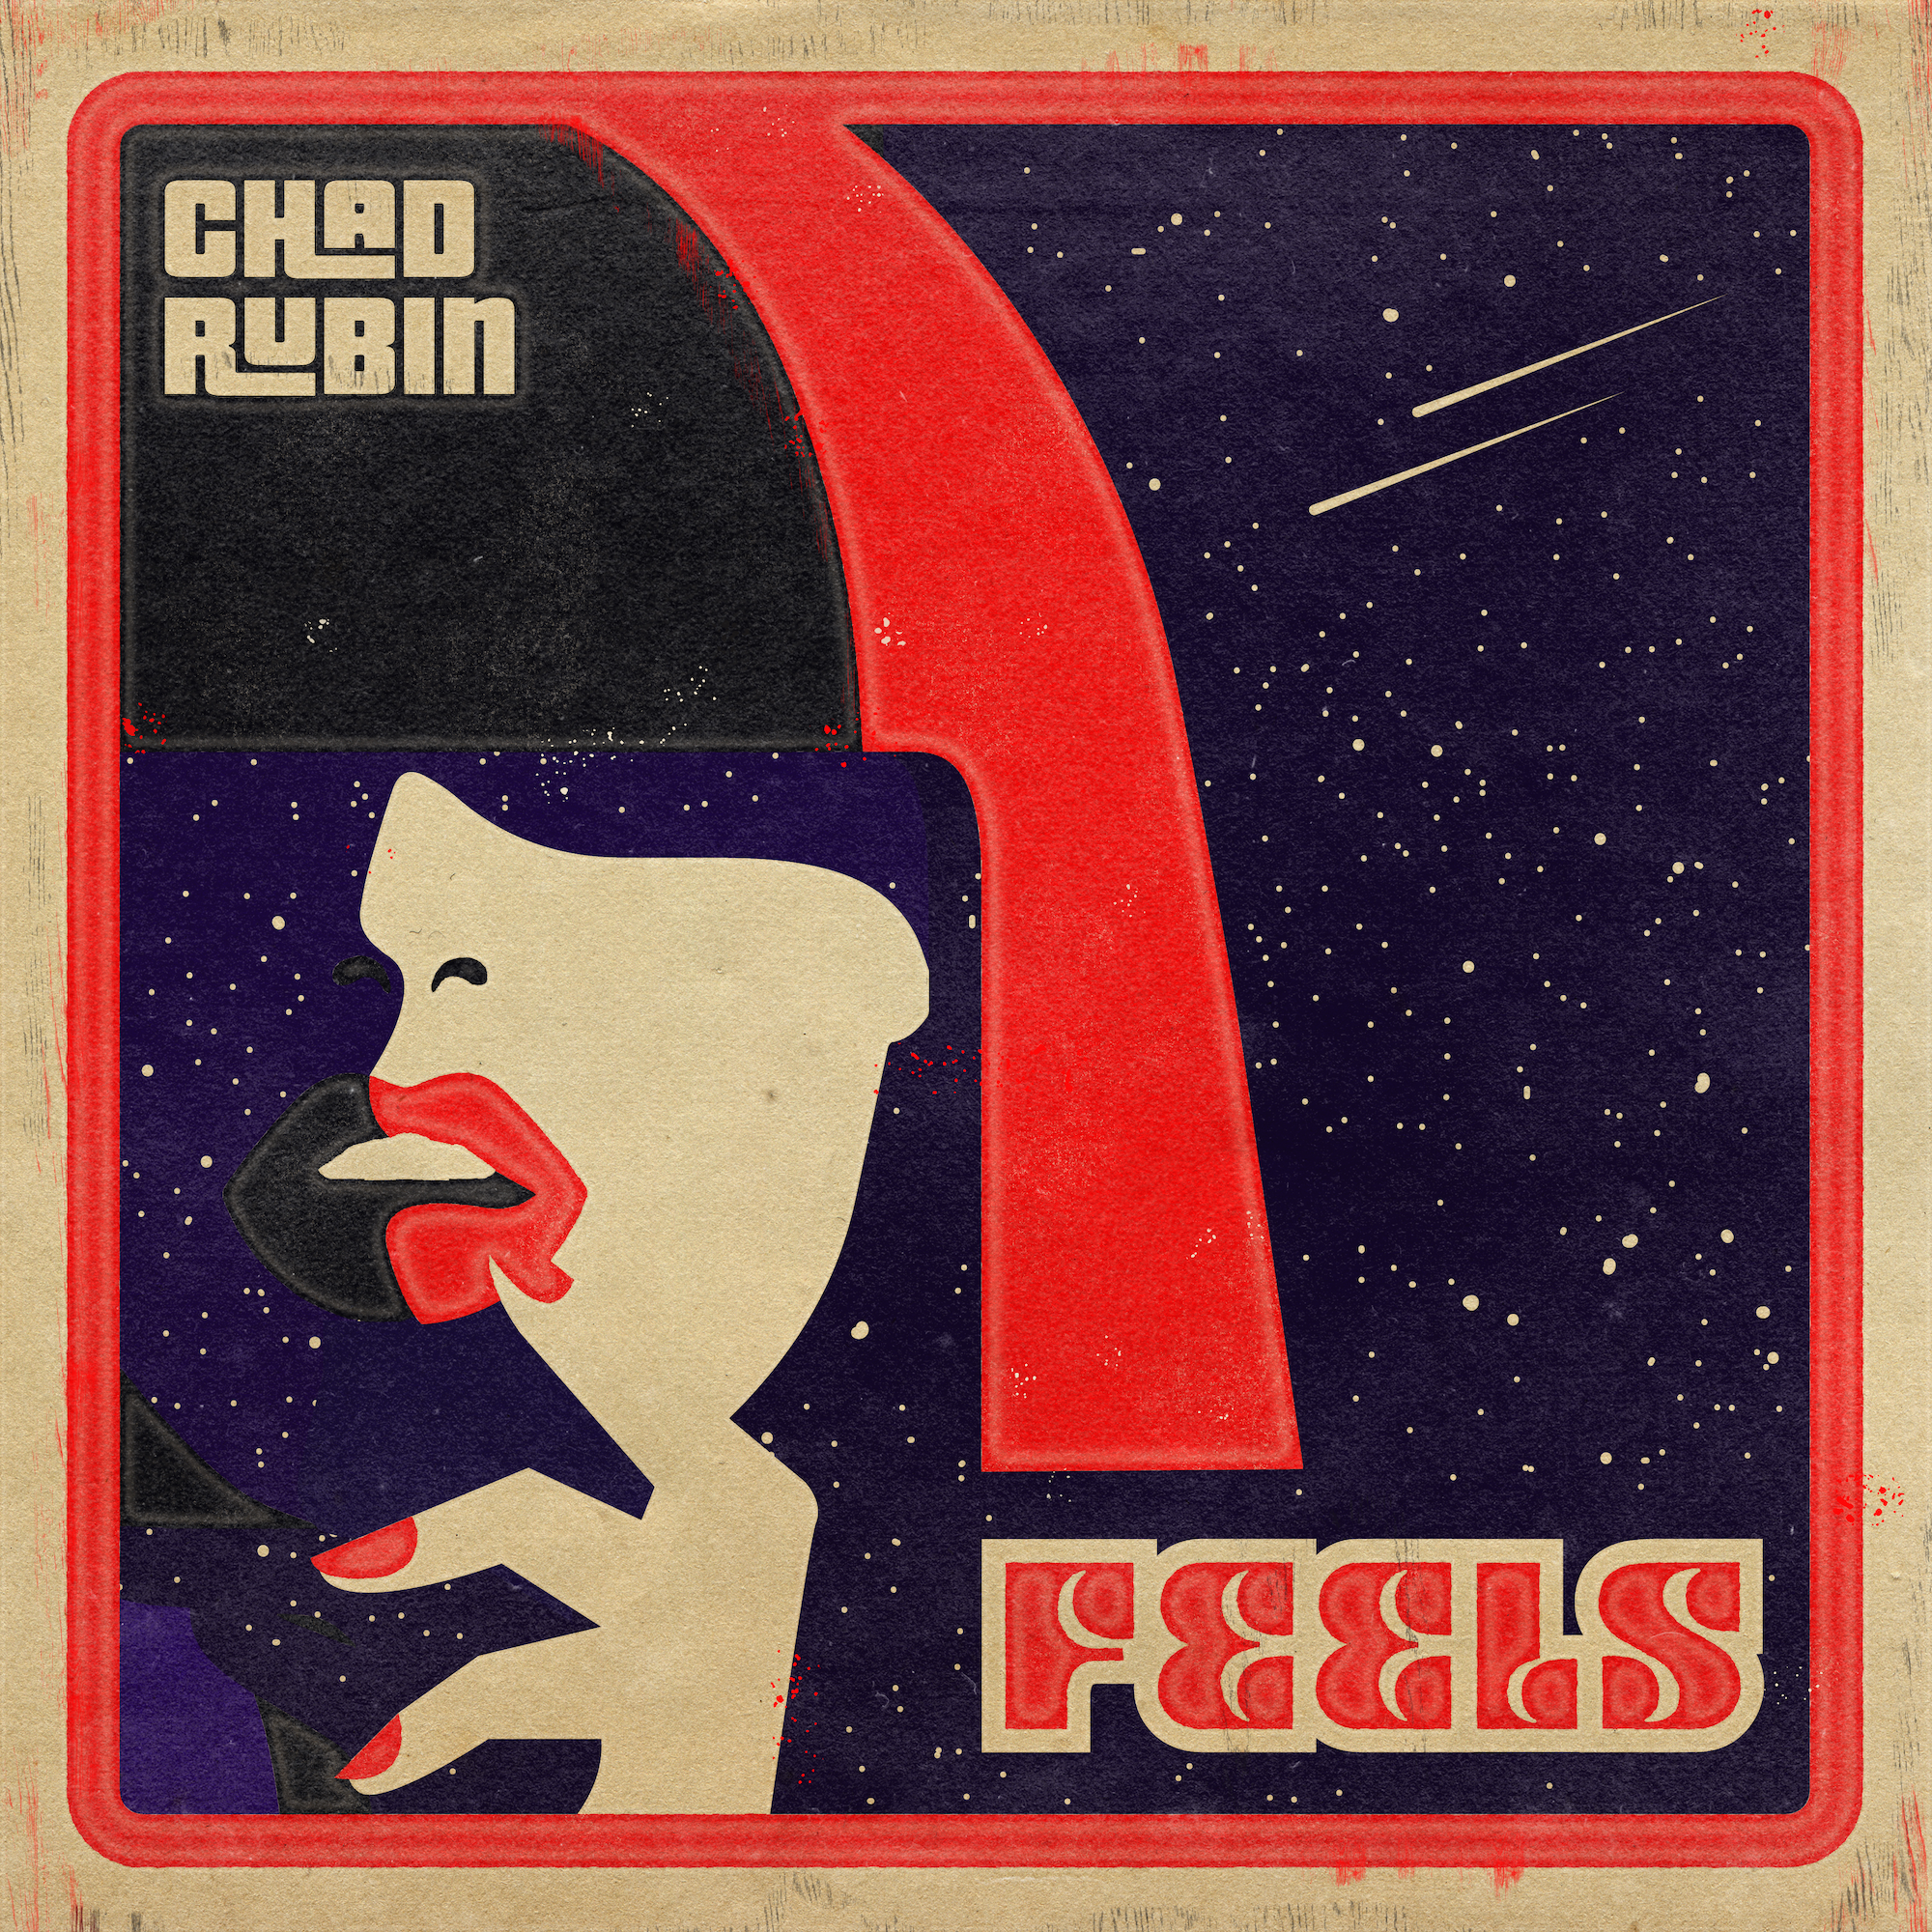 ‘Chad Rubin’ is a strong singer/songwriter who delivers a gem with new album ‘Feels’.